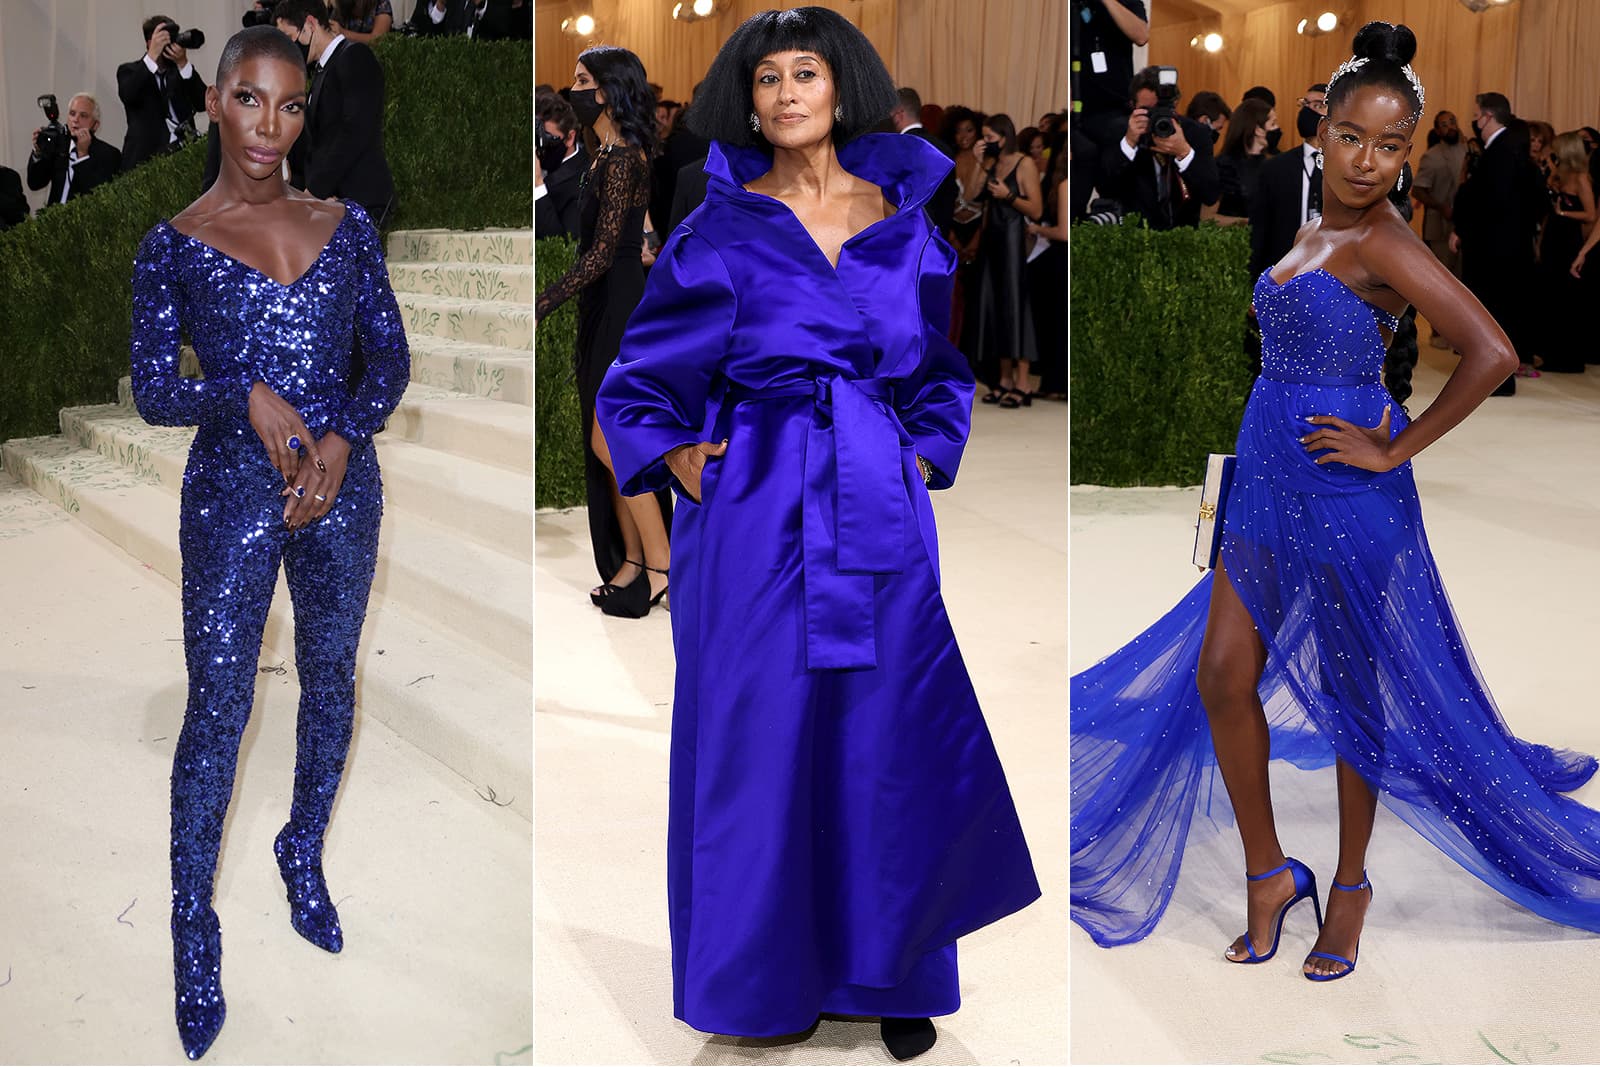 At the Met Gala 2021 from left to right: Michaela Coel in Nikos Koulis, Tracee Ellis Ross in Tiffany & Co., and Amanda Gorman in Chopard with a crown by Jennifer Behr